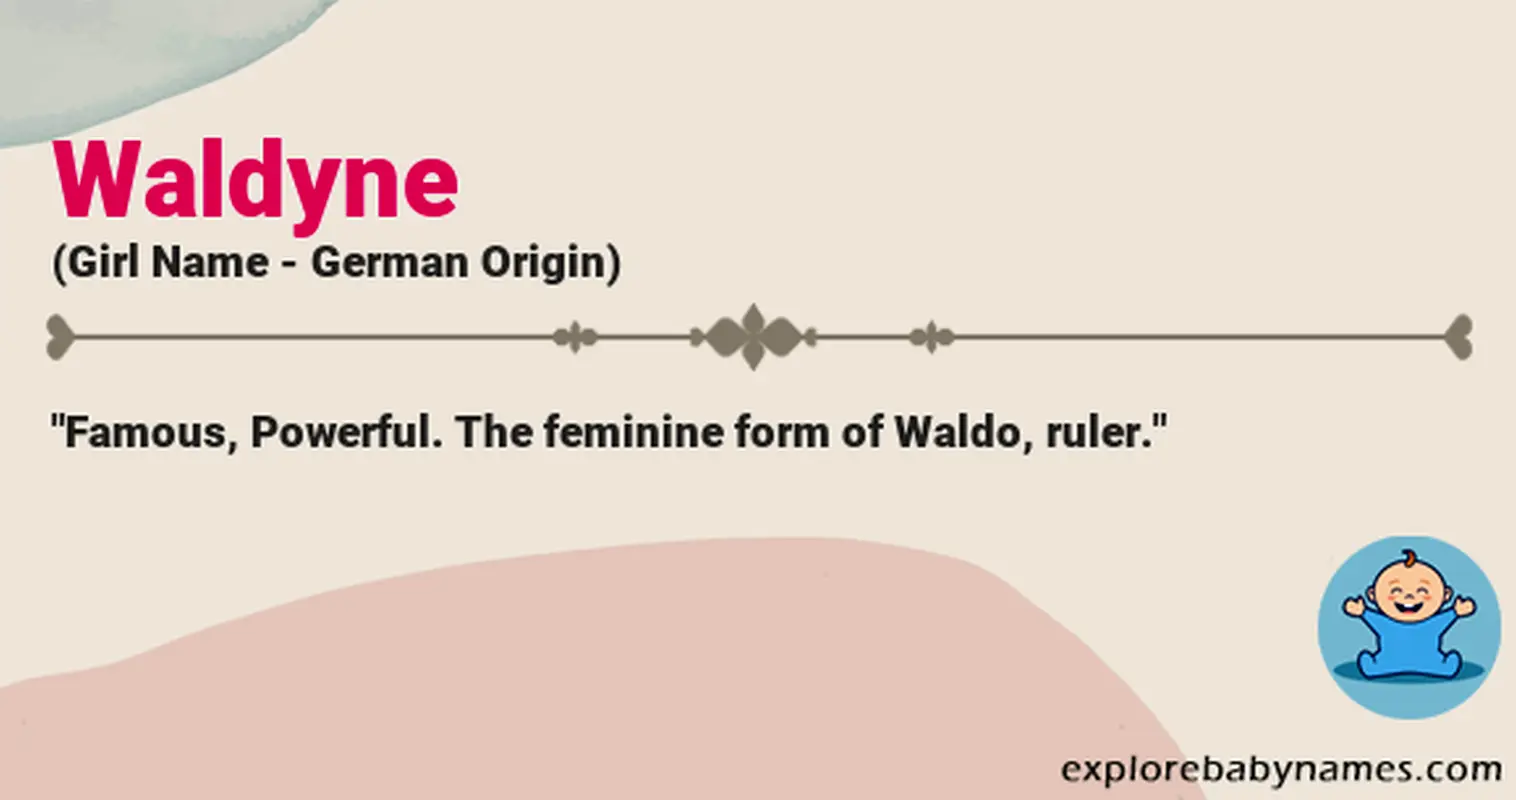 Meaning of Waldyne